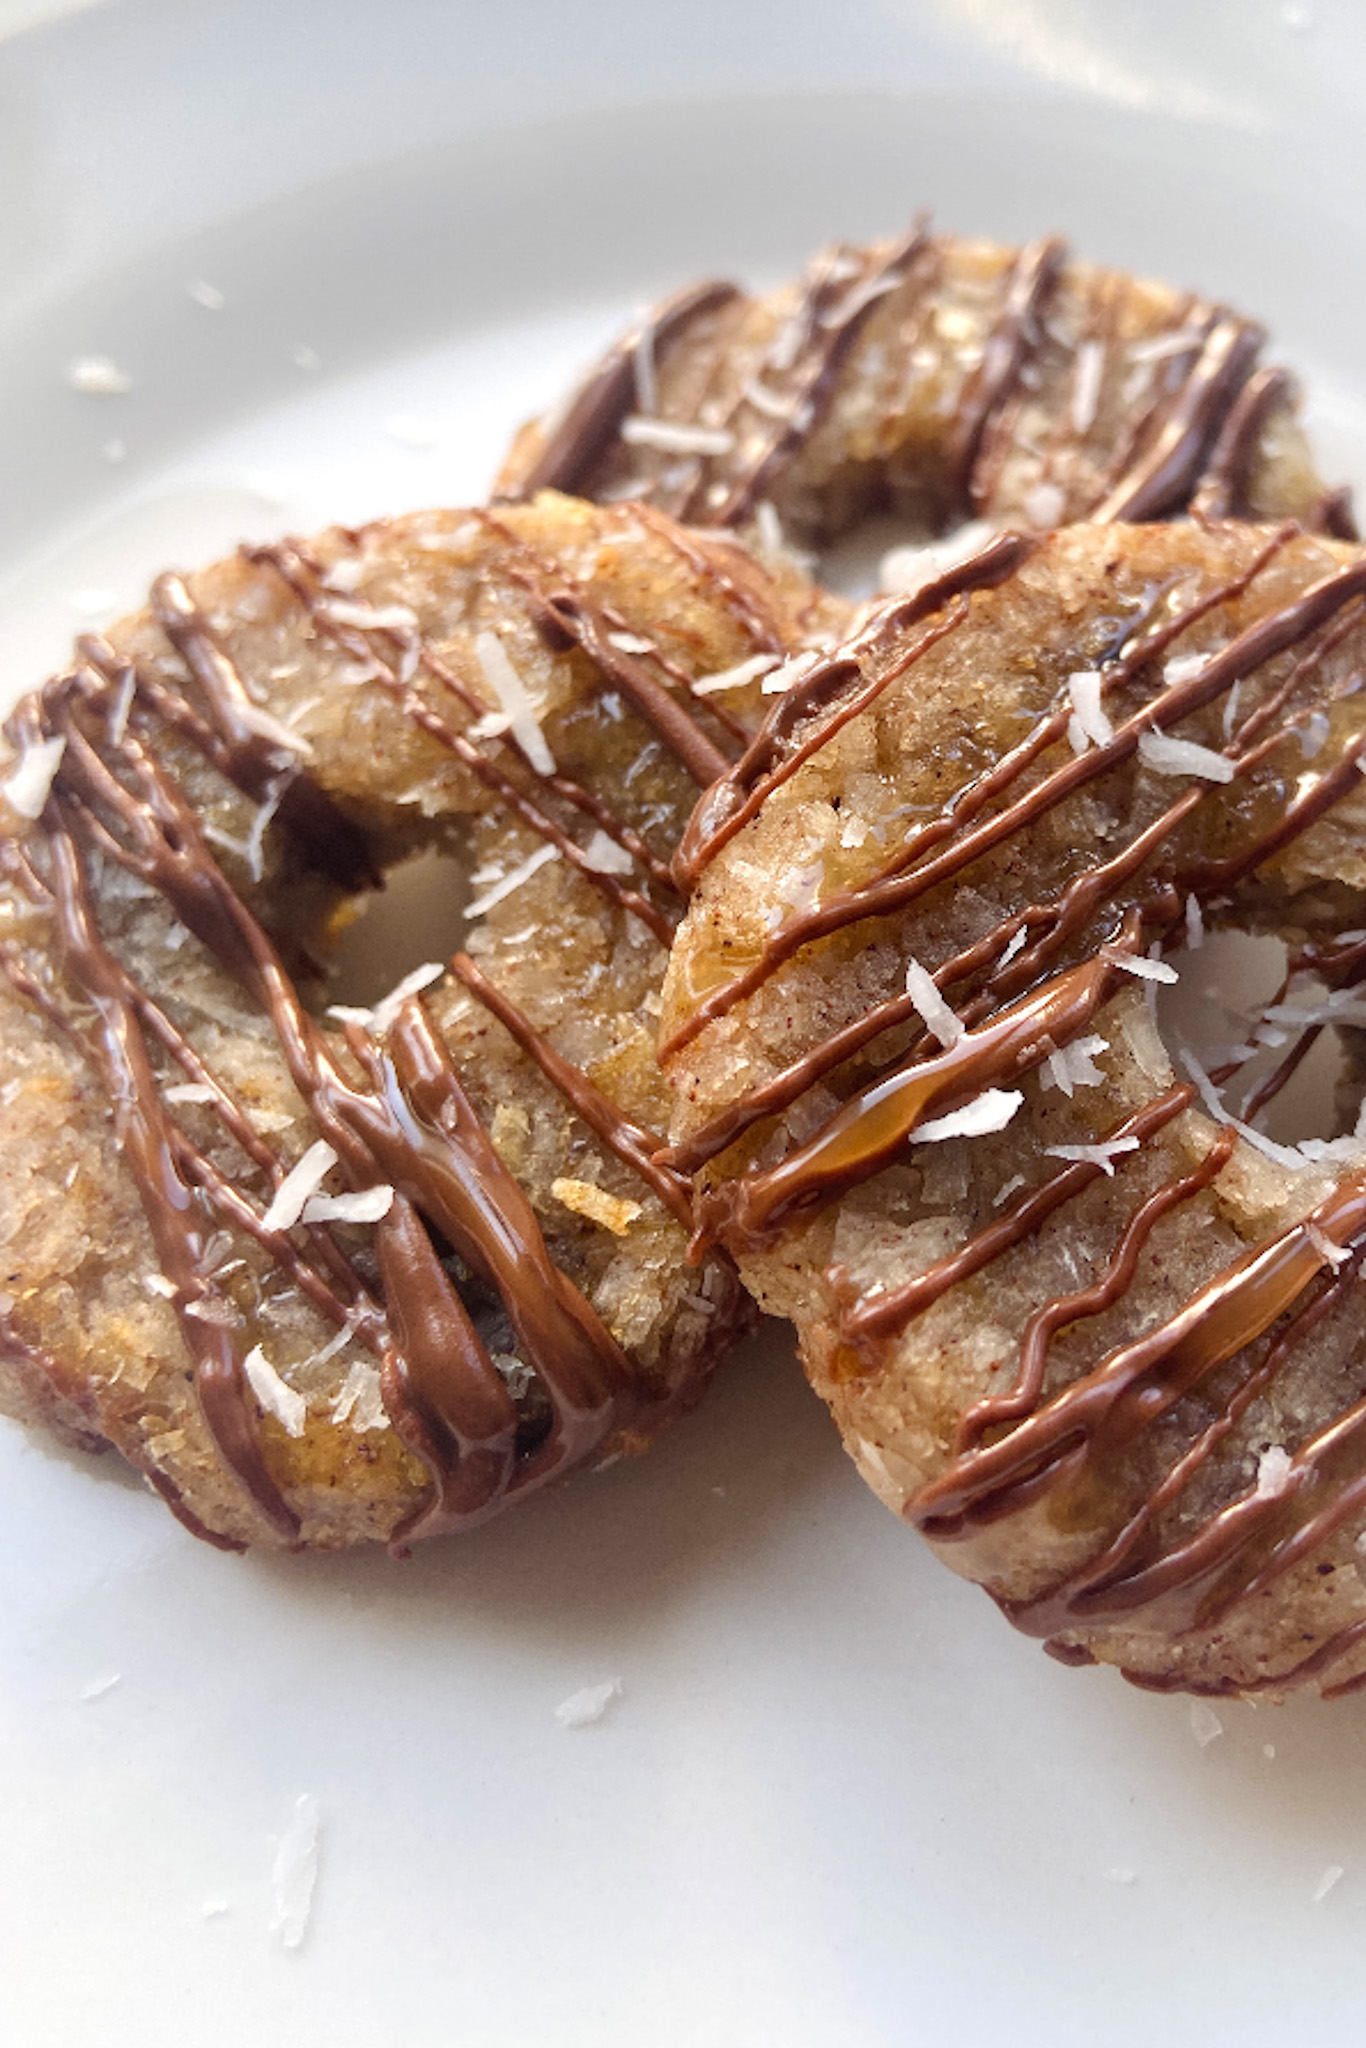 Coconut cookies drizzled with chocolate and caramel sauce